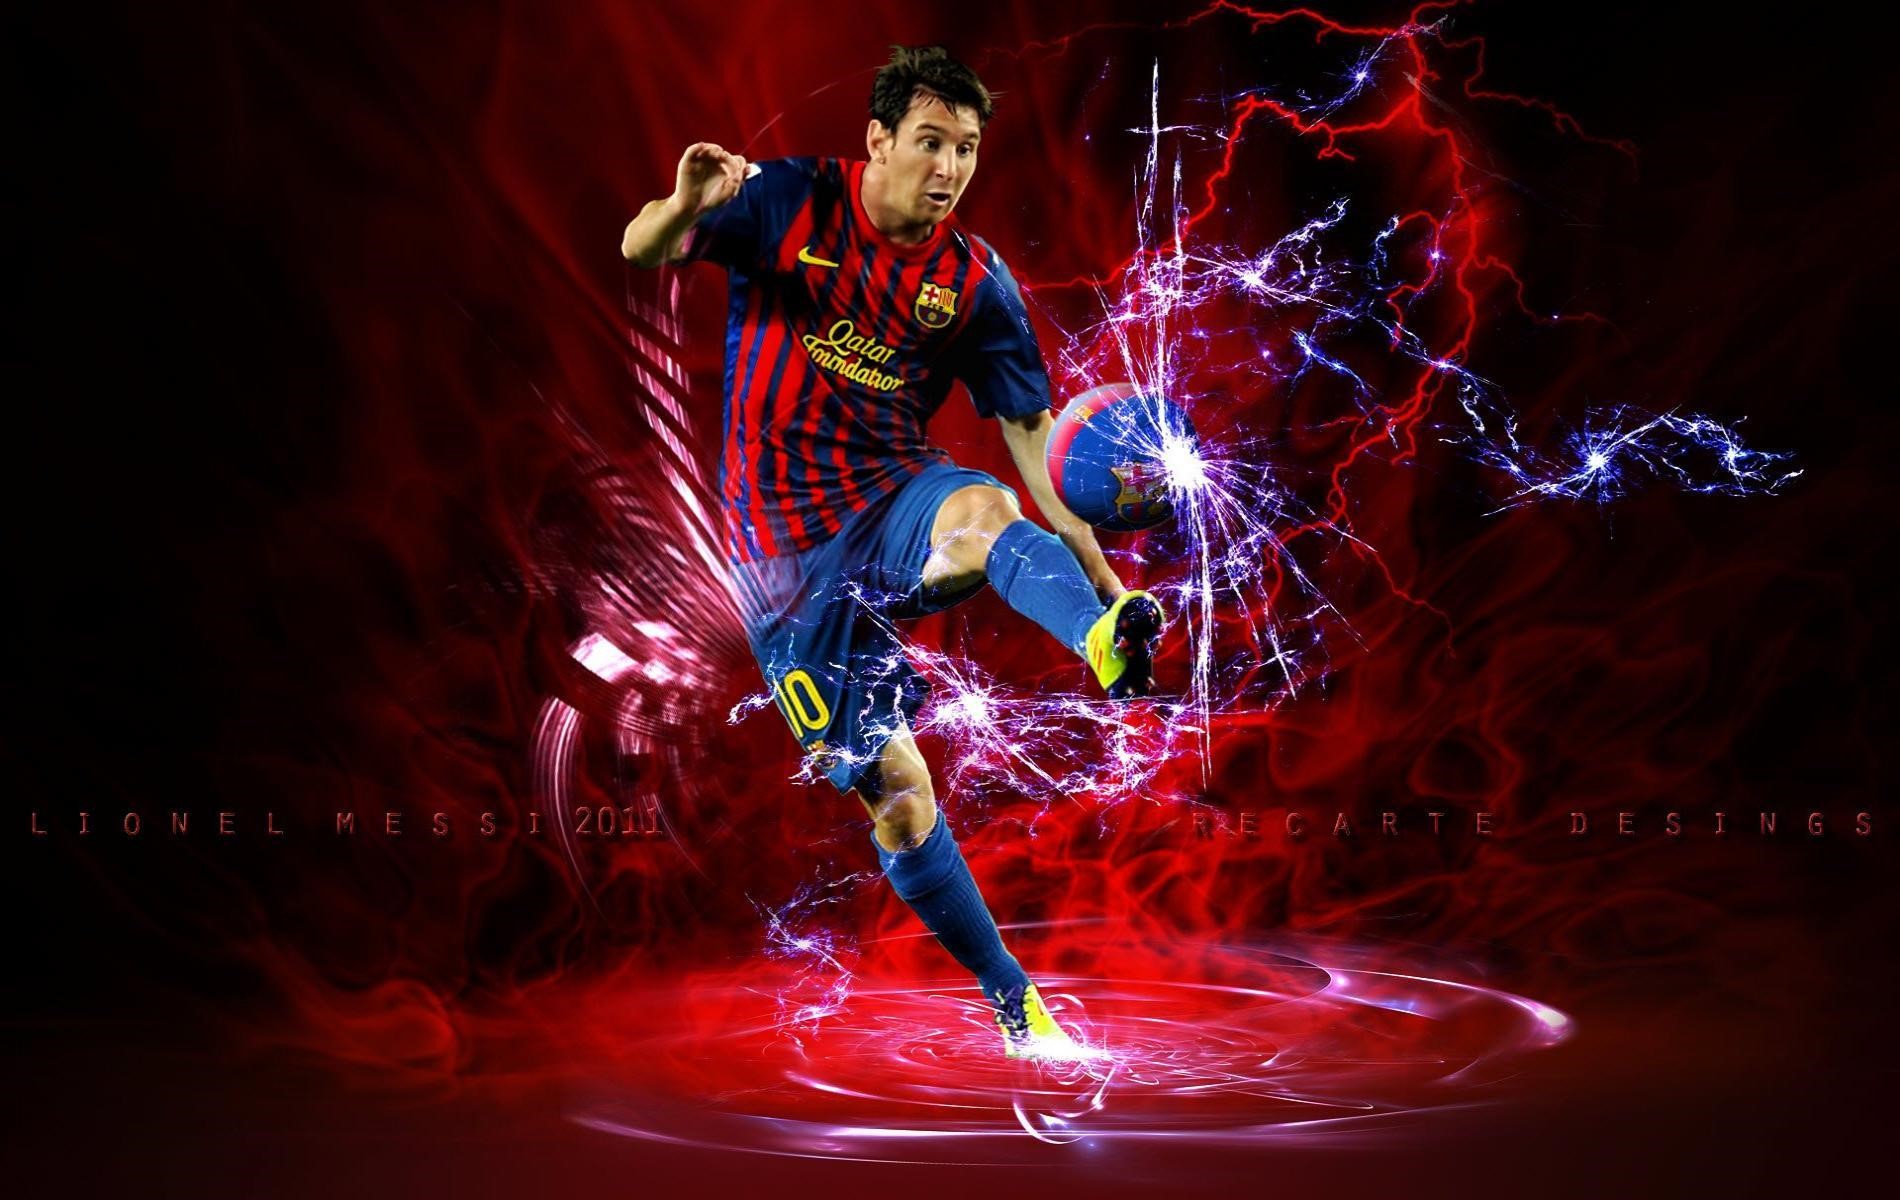 Cool Picture Of Messi - HD Wallpaper 